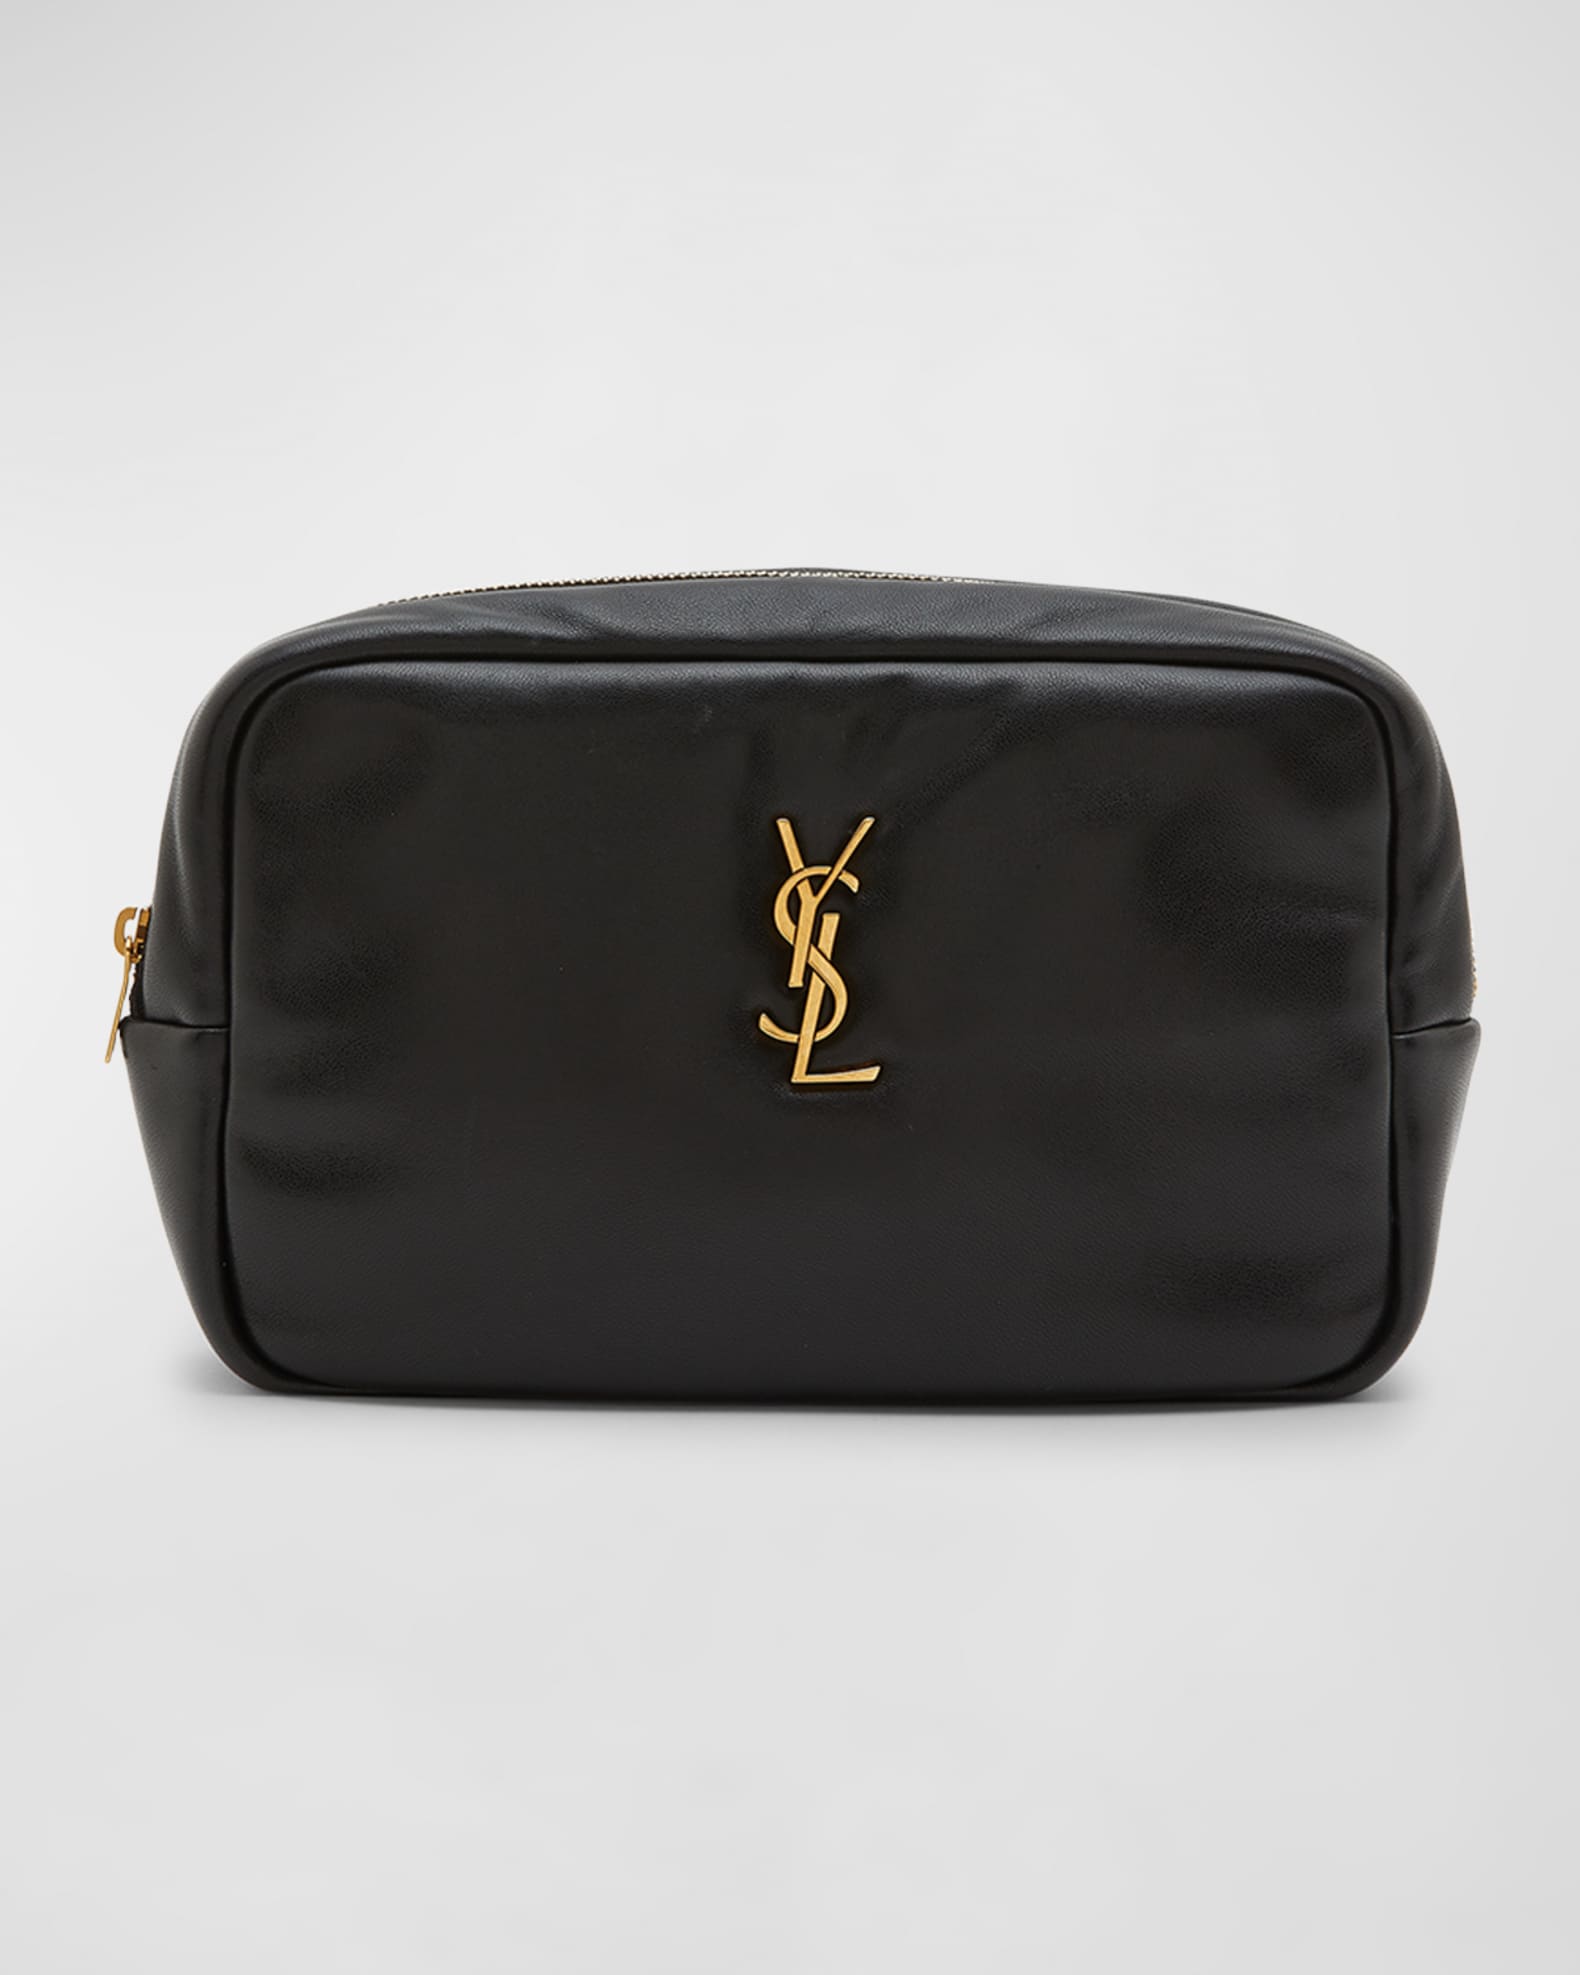 Saint Laurent Lou Camera Bag is BACK IN STOCK (and 25% off